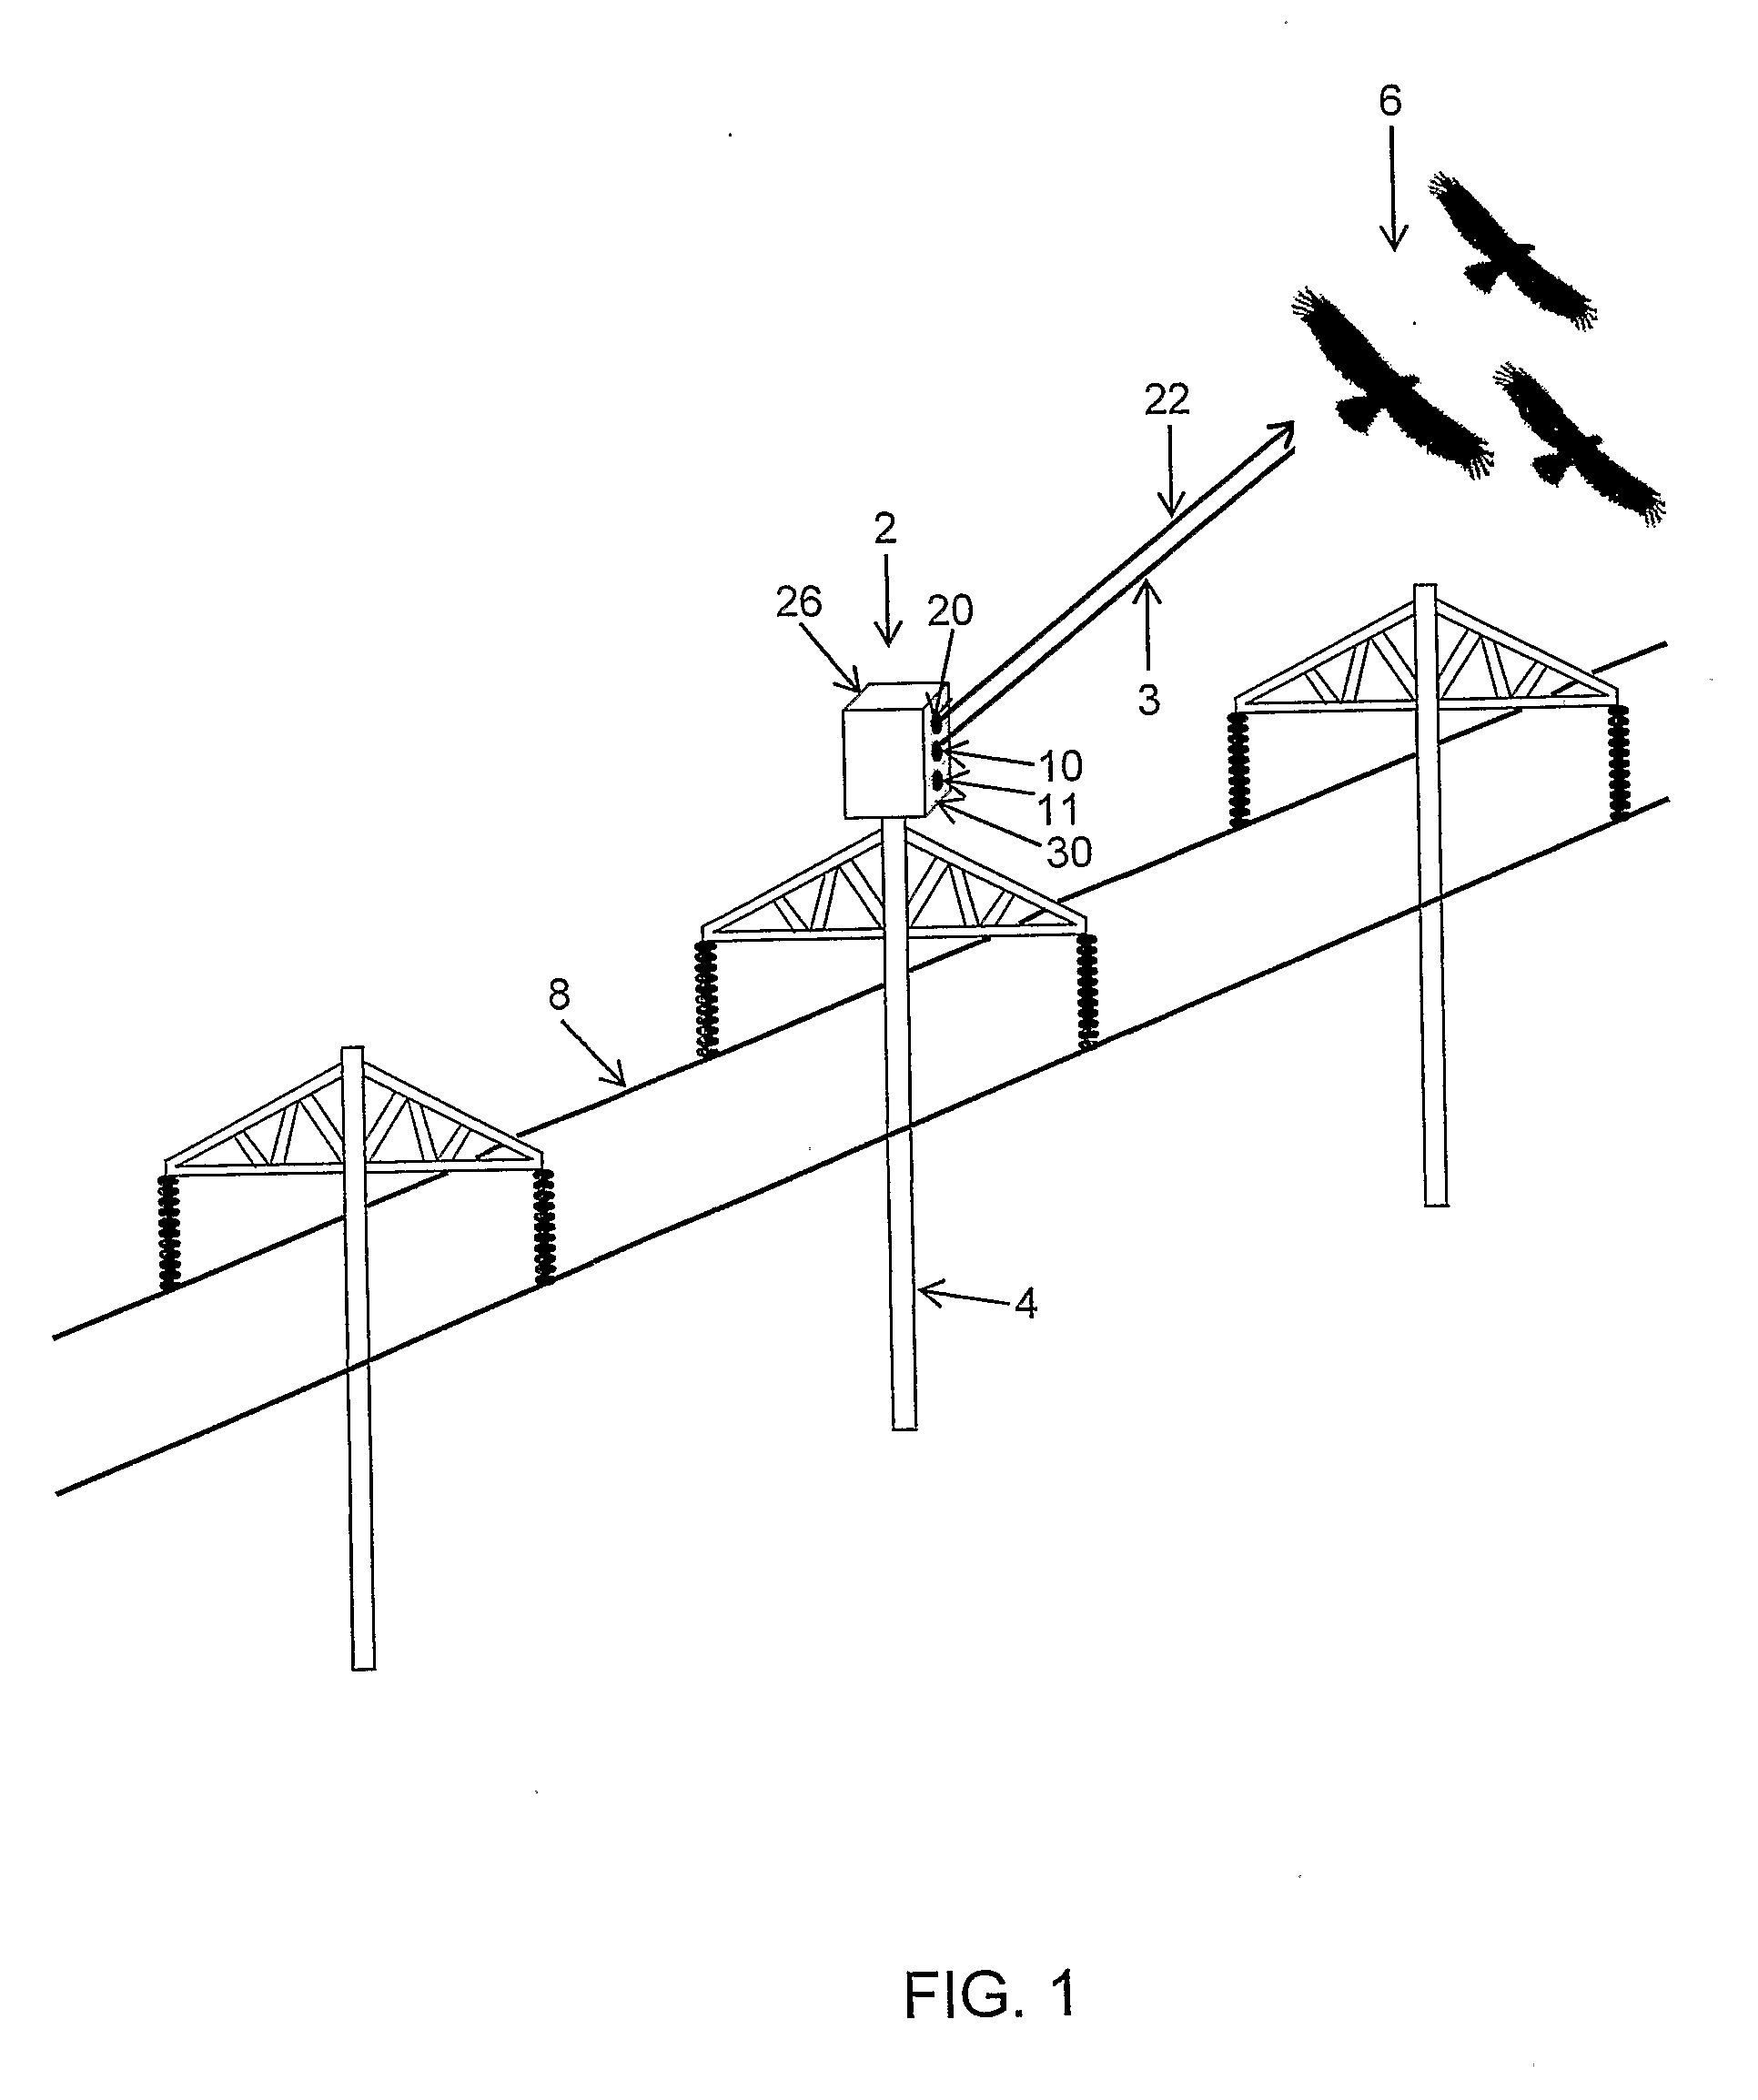 Method and system for detecting and deterring animal intruders